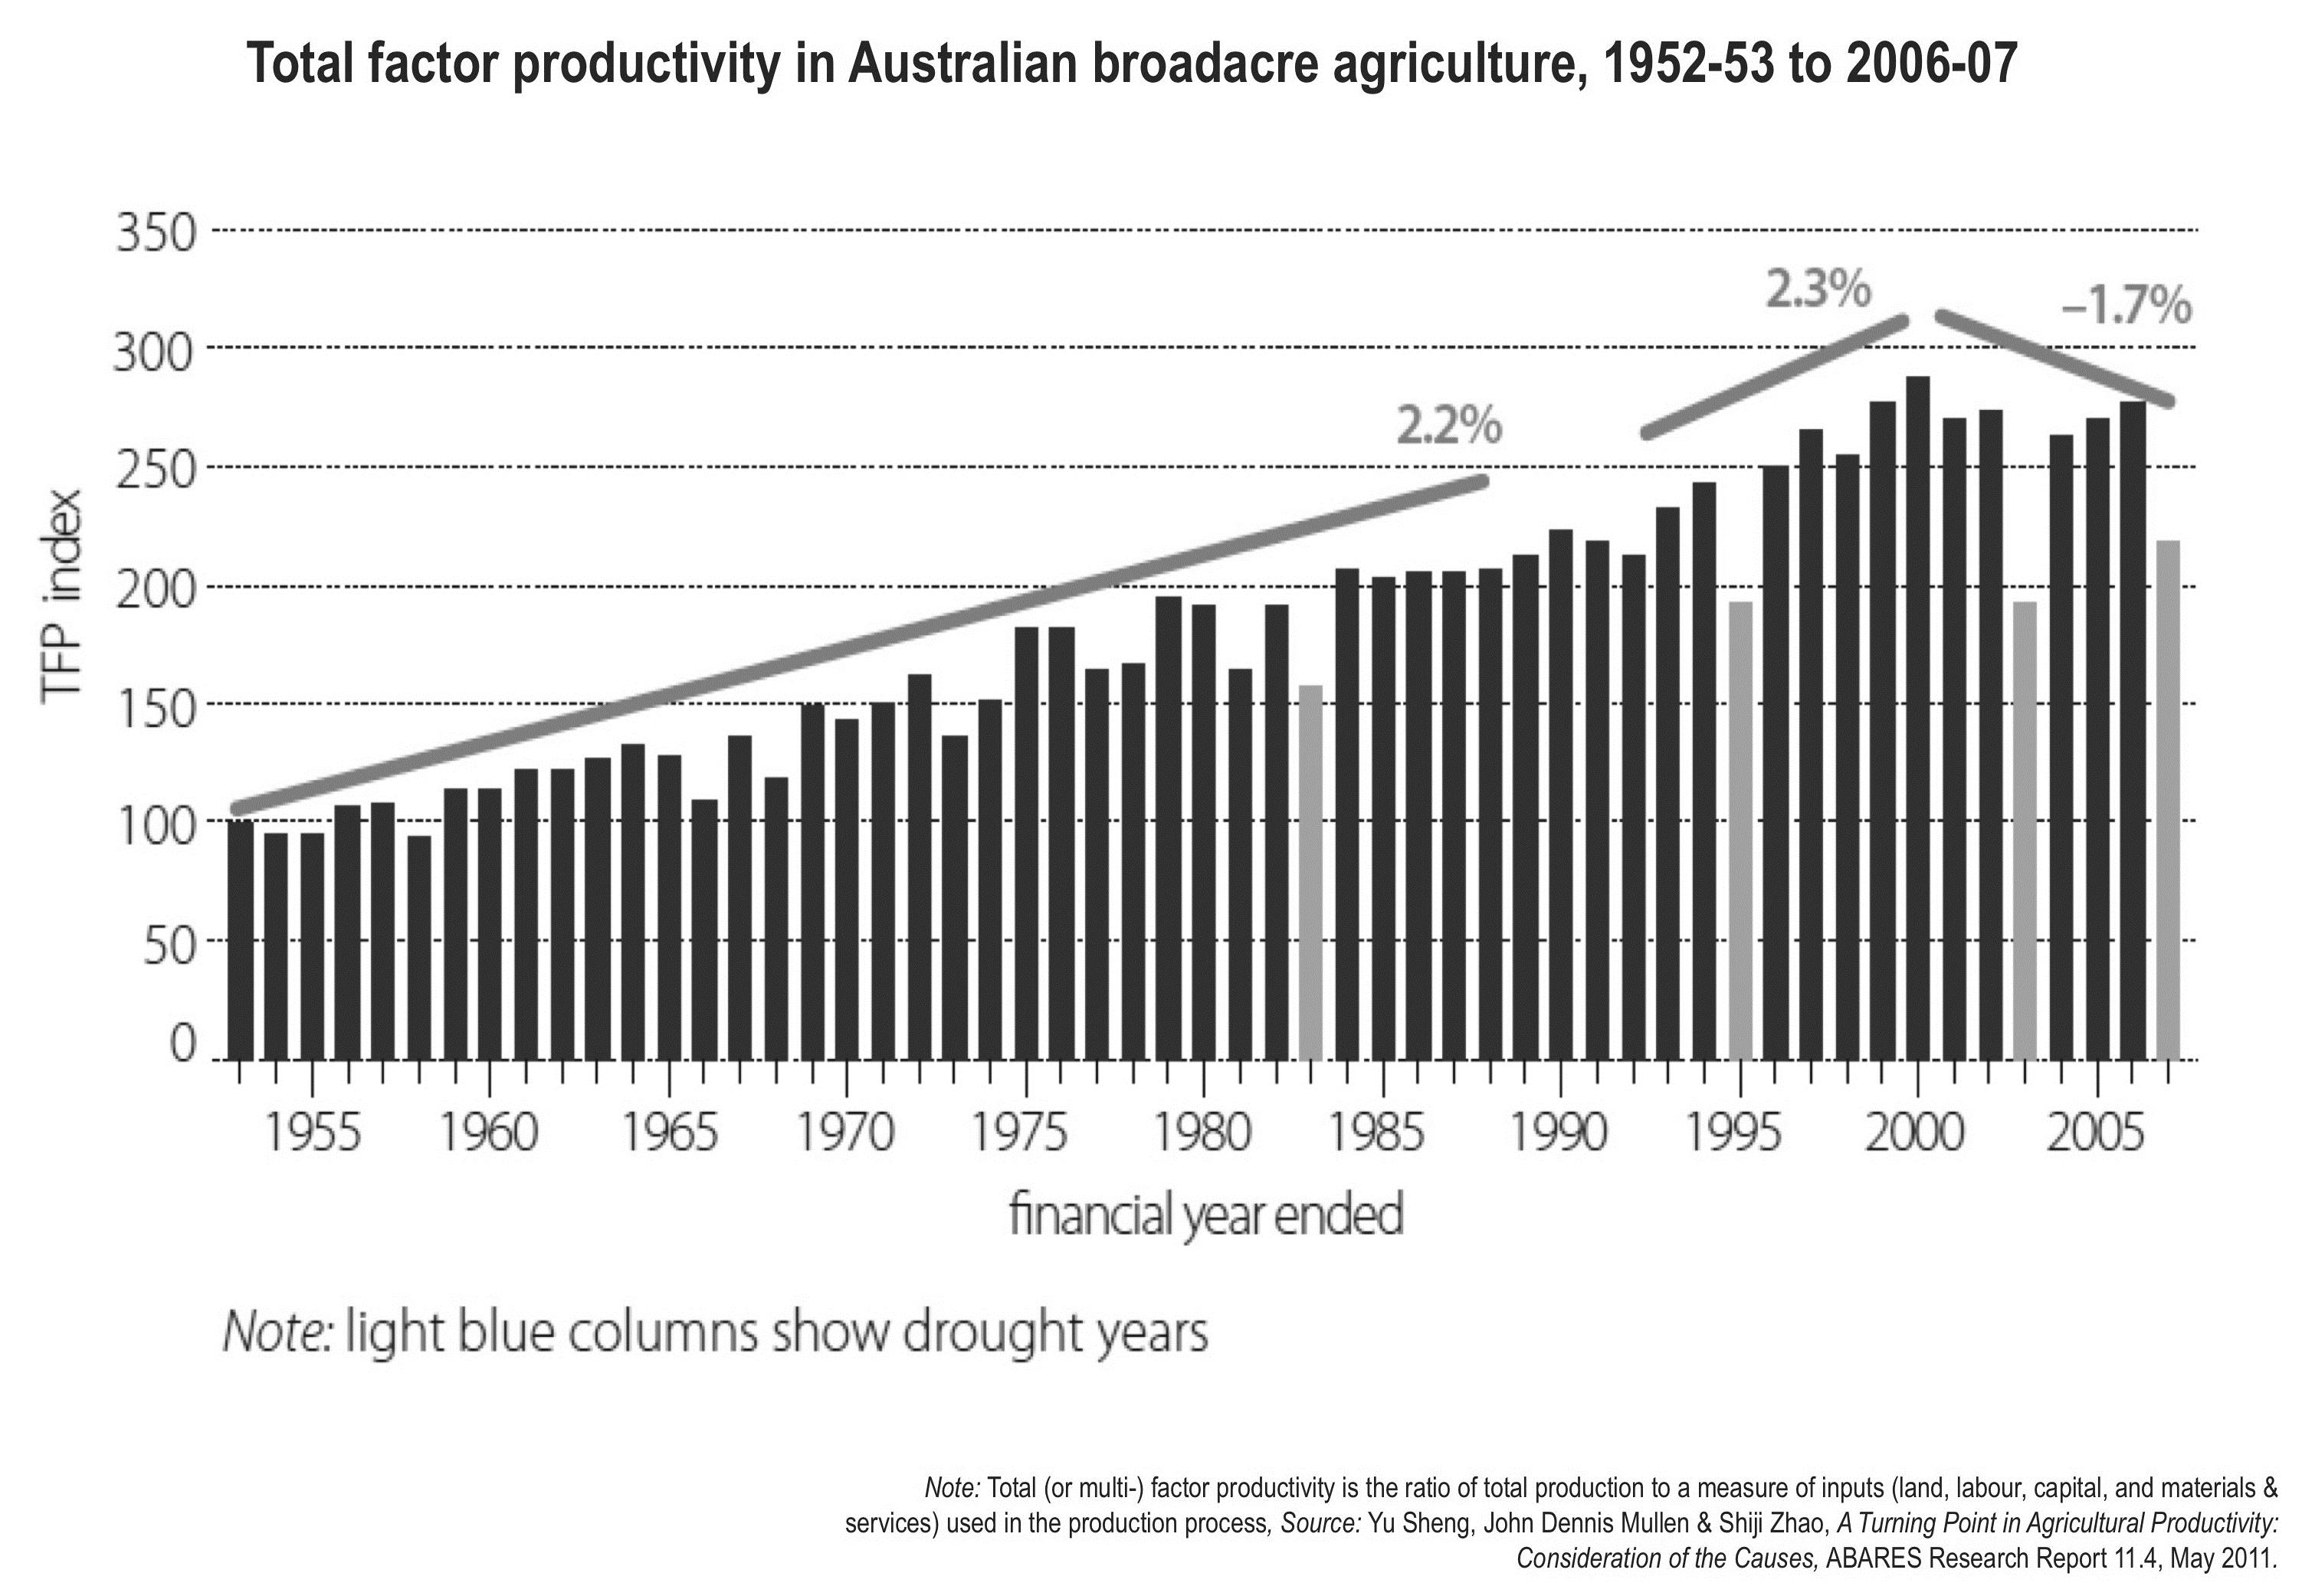 Figure 31: Total factor productivity in Australian broadacre agriculture, 1952-53 to 2006-07.